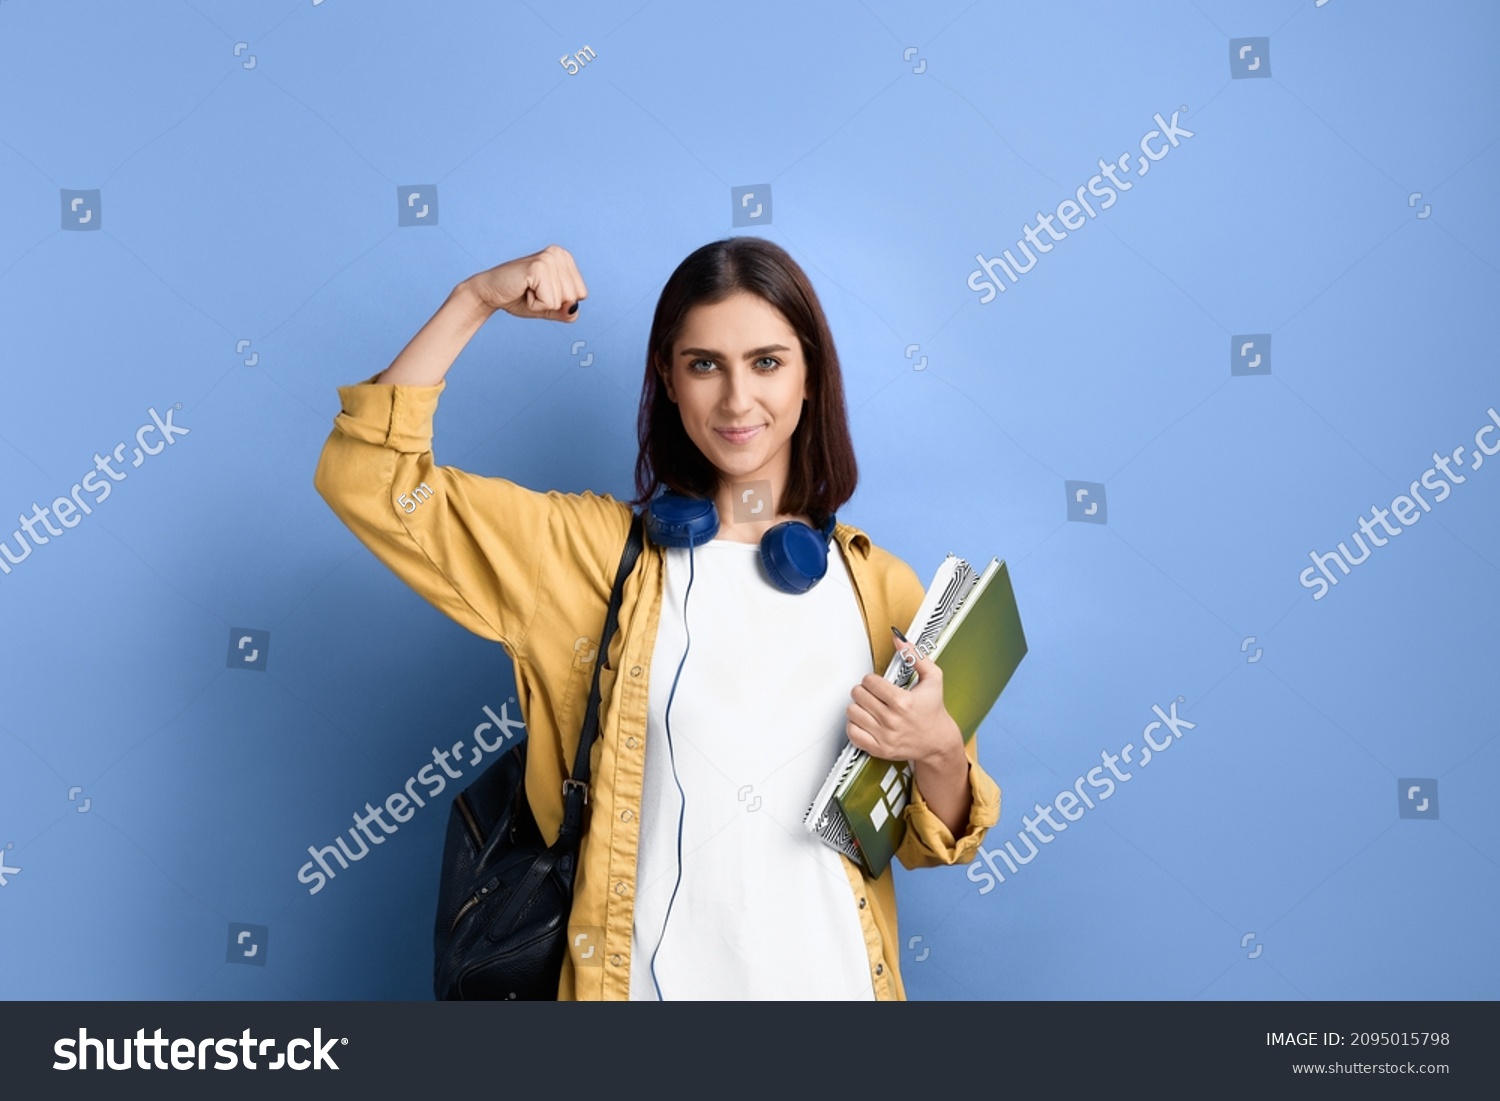 Good luck. Strong smiling student girl shows muscles, passed a milestone, confident in her knowledge, holding books, wearing yellow shirt, white t-shirt, black bag and headphones over neck #2095015798